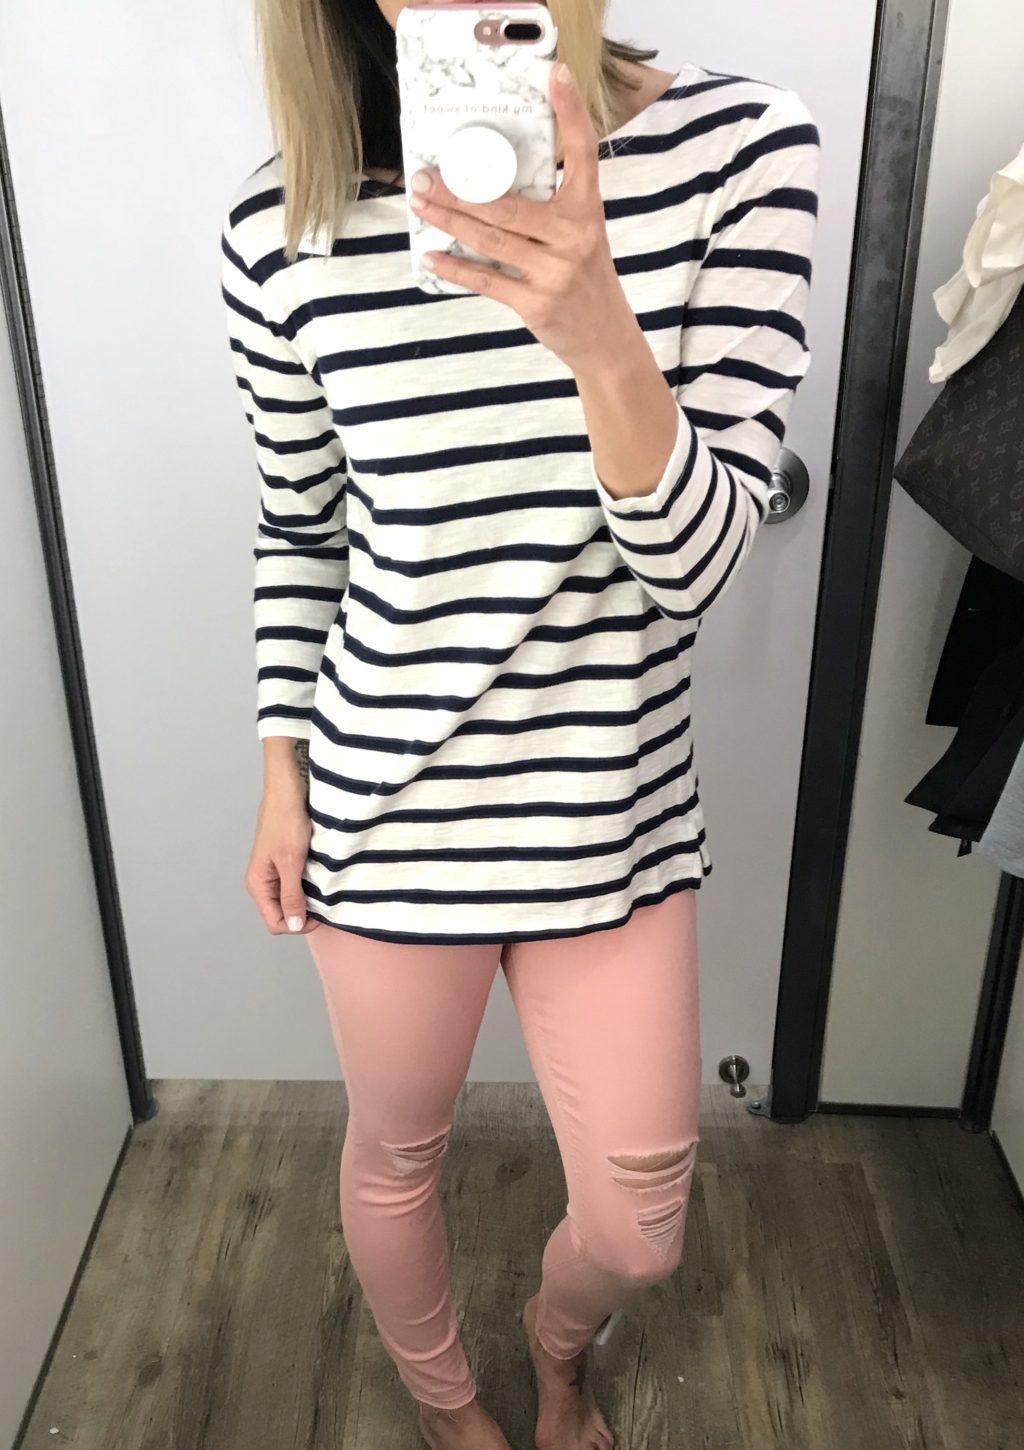 Old Navy try-on haul, striped tee and pink denim